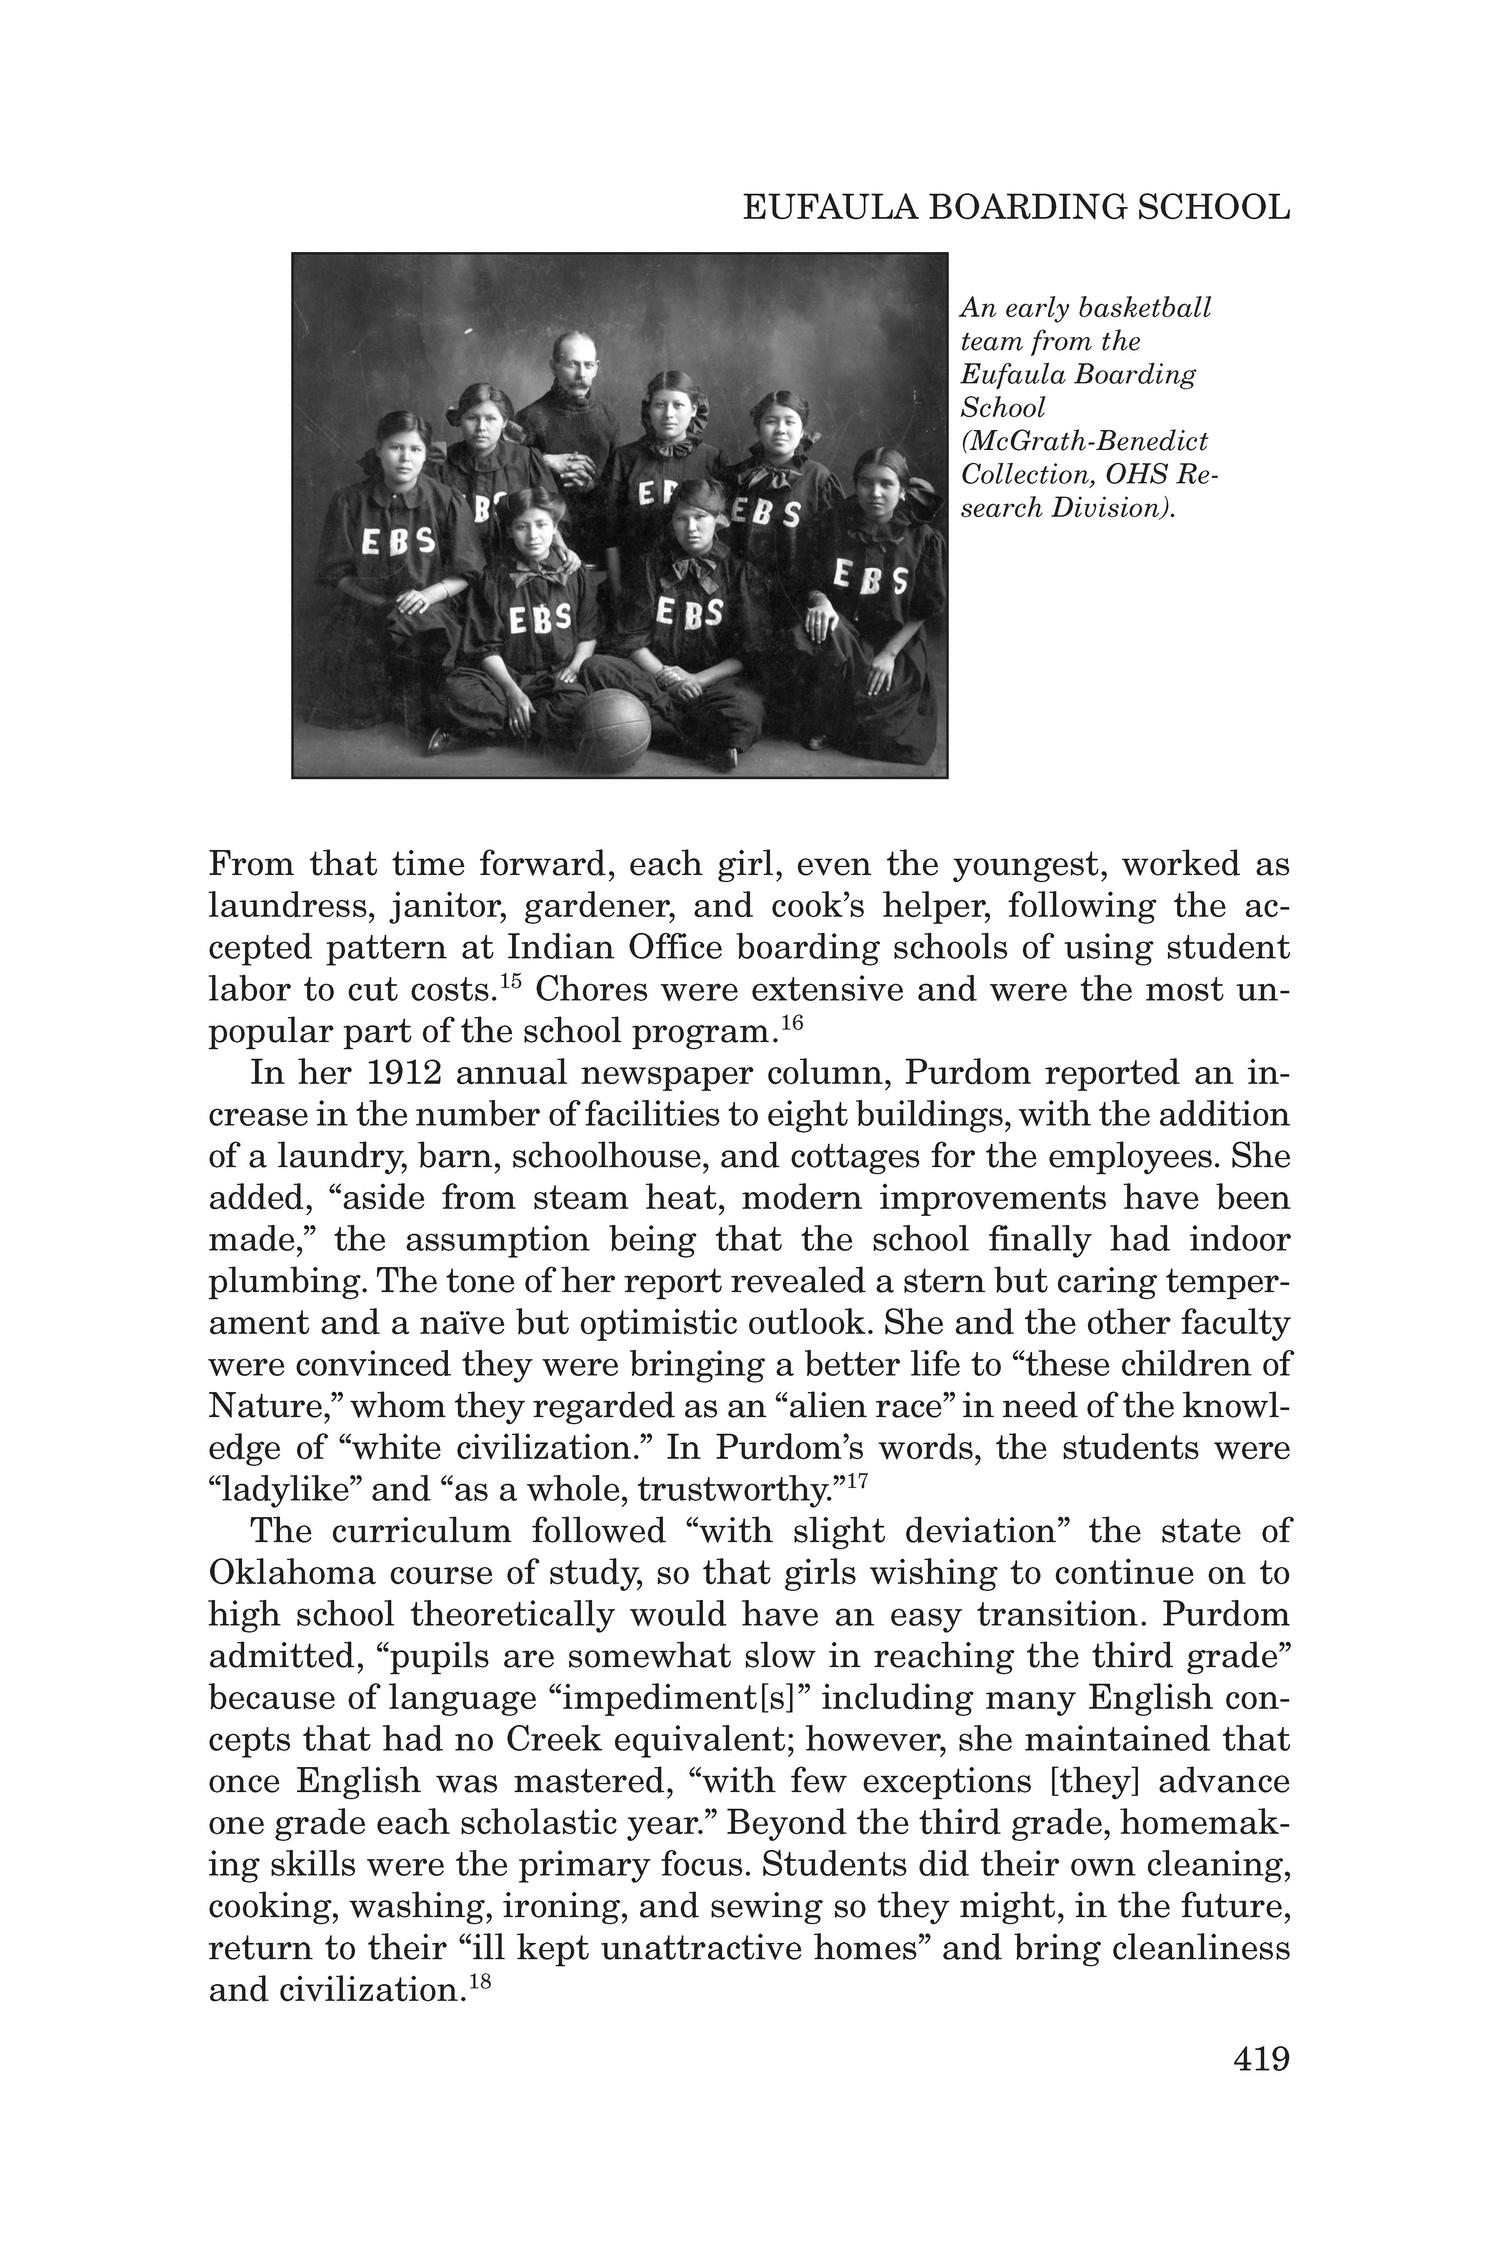 Planting the "Long-Rooted Grass": The Eufaula Boarding School for Girls, 1910-1962
                                                
                                                    419
                                                